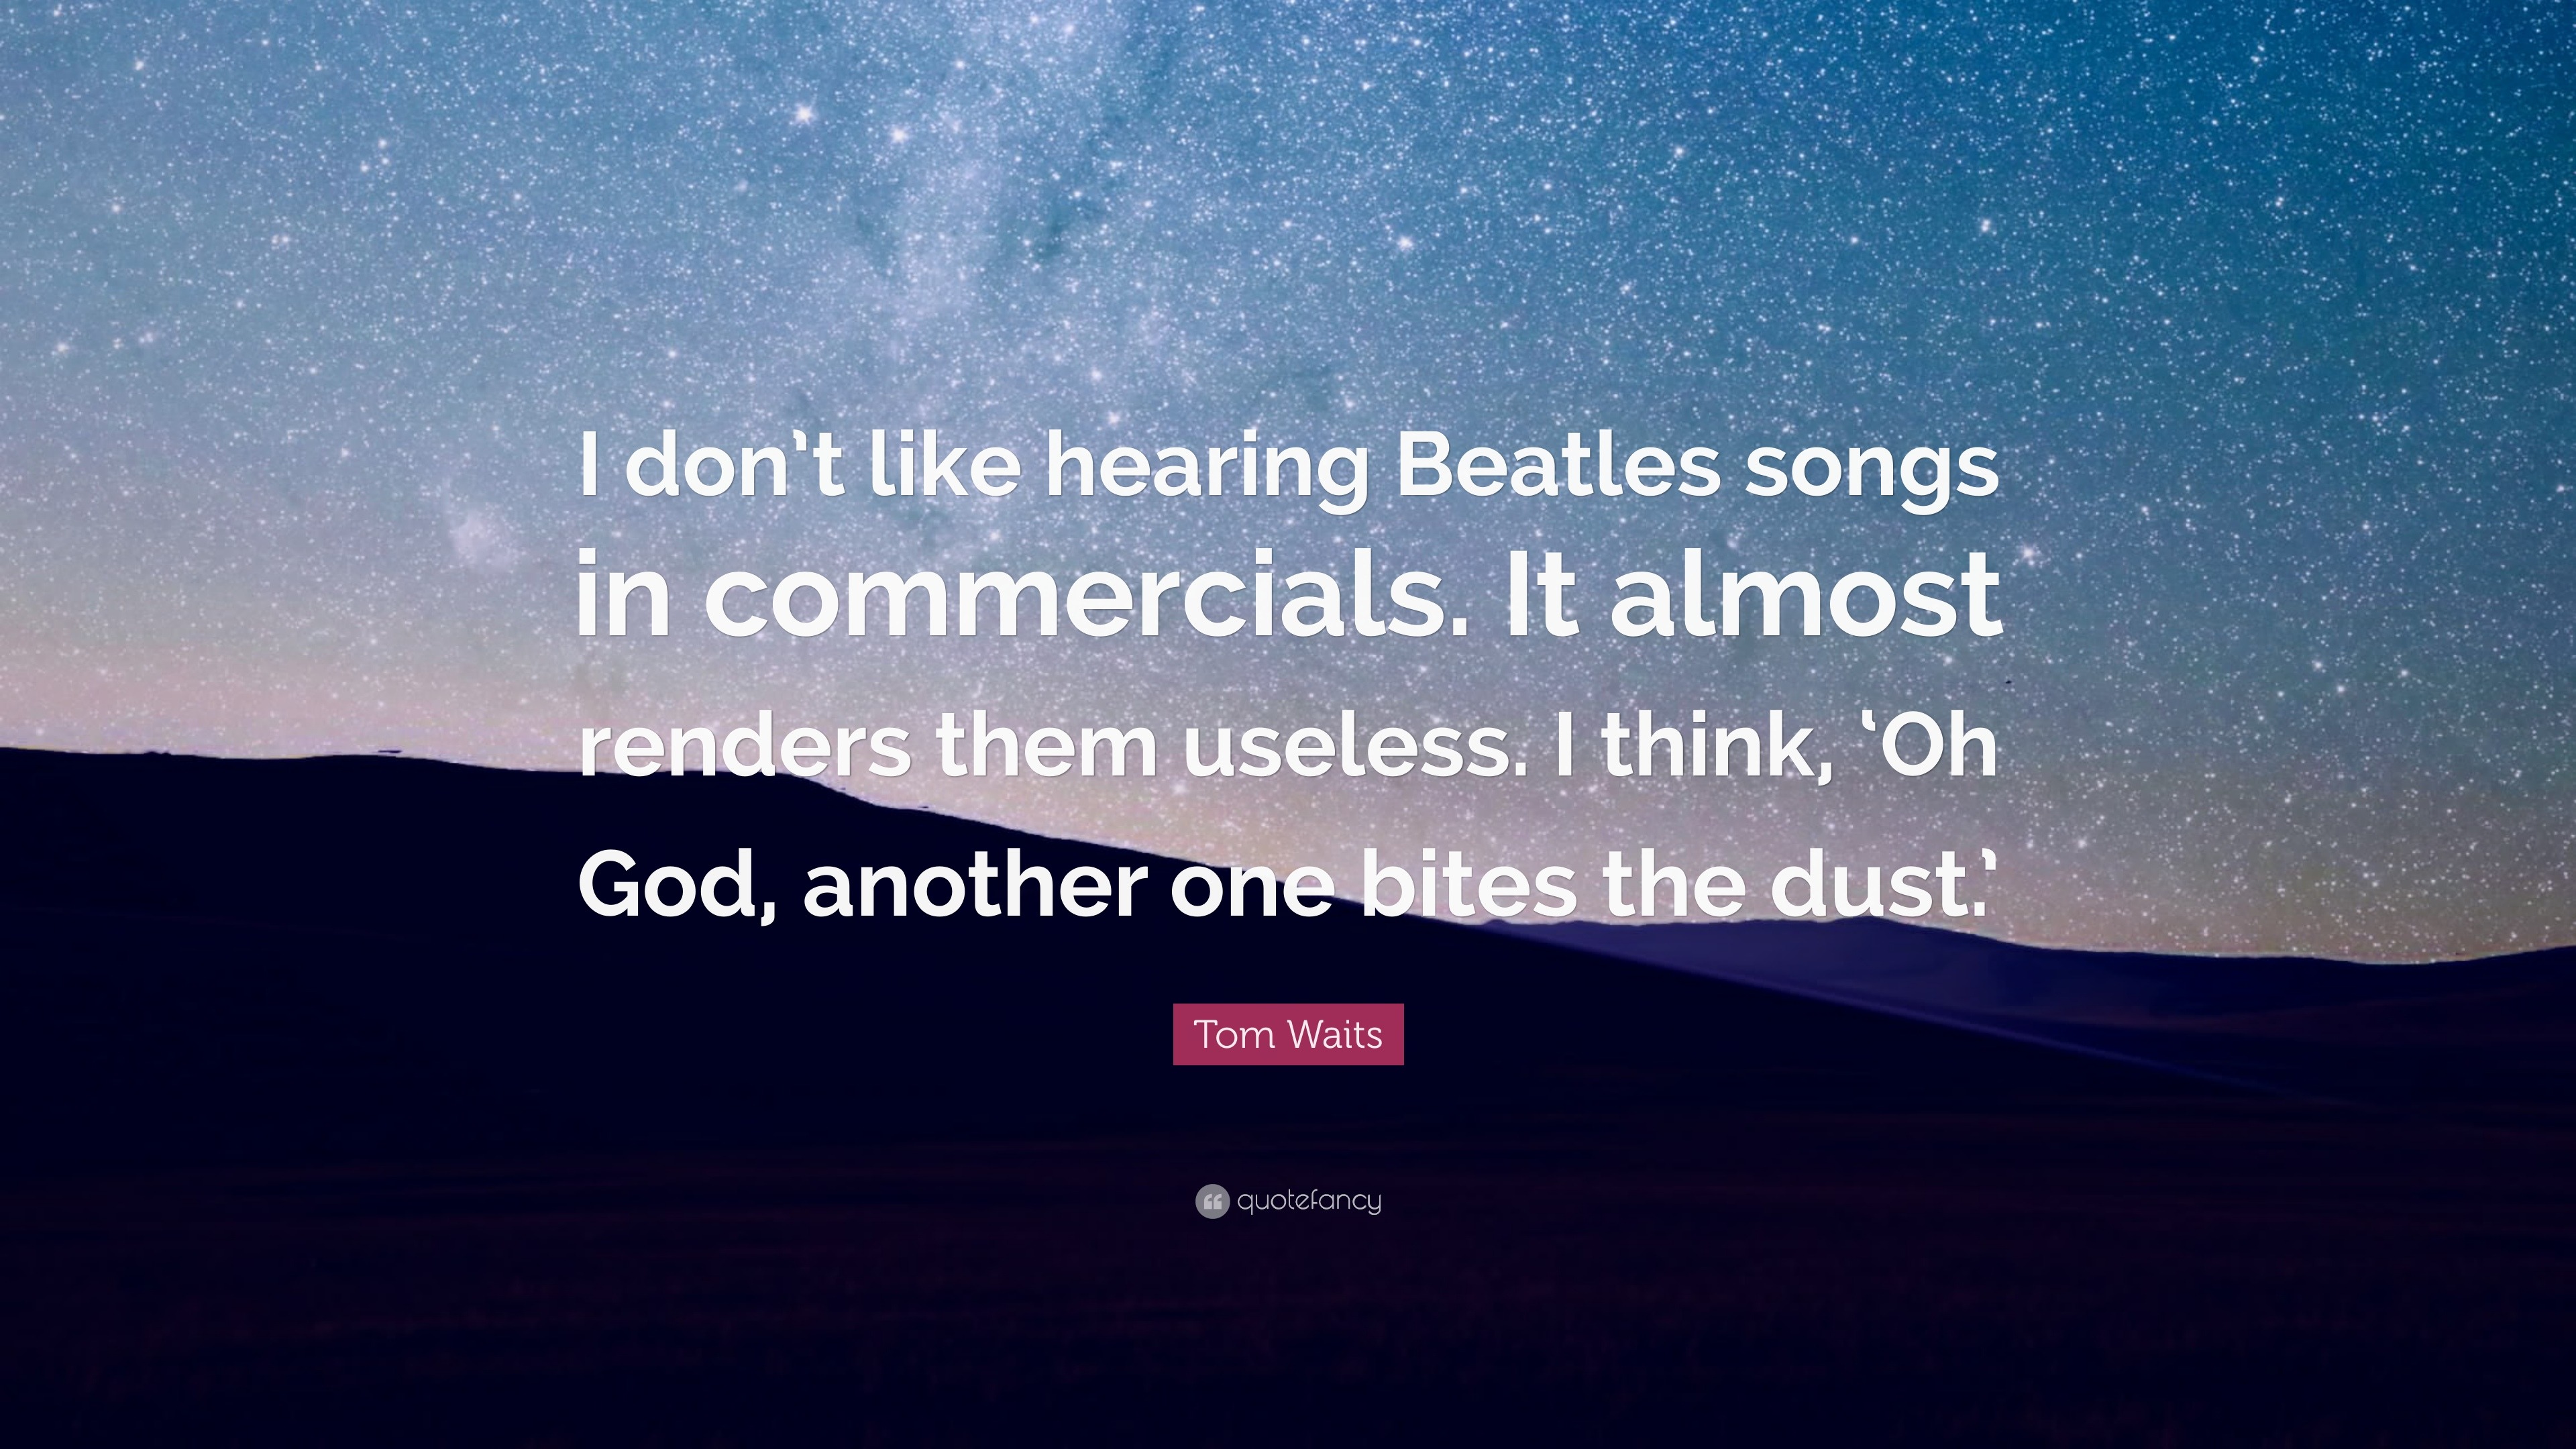 Tom Waits Quote “I don’t like hearing Beatles songs in commercials. It